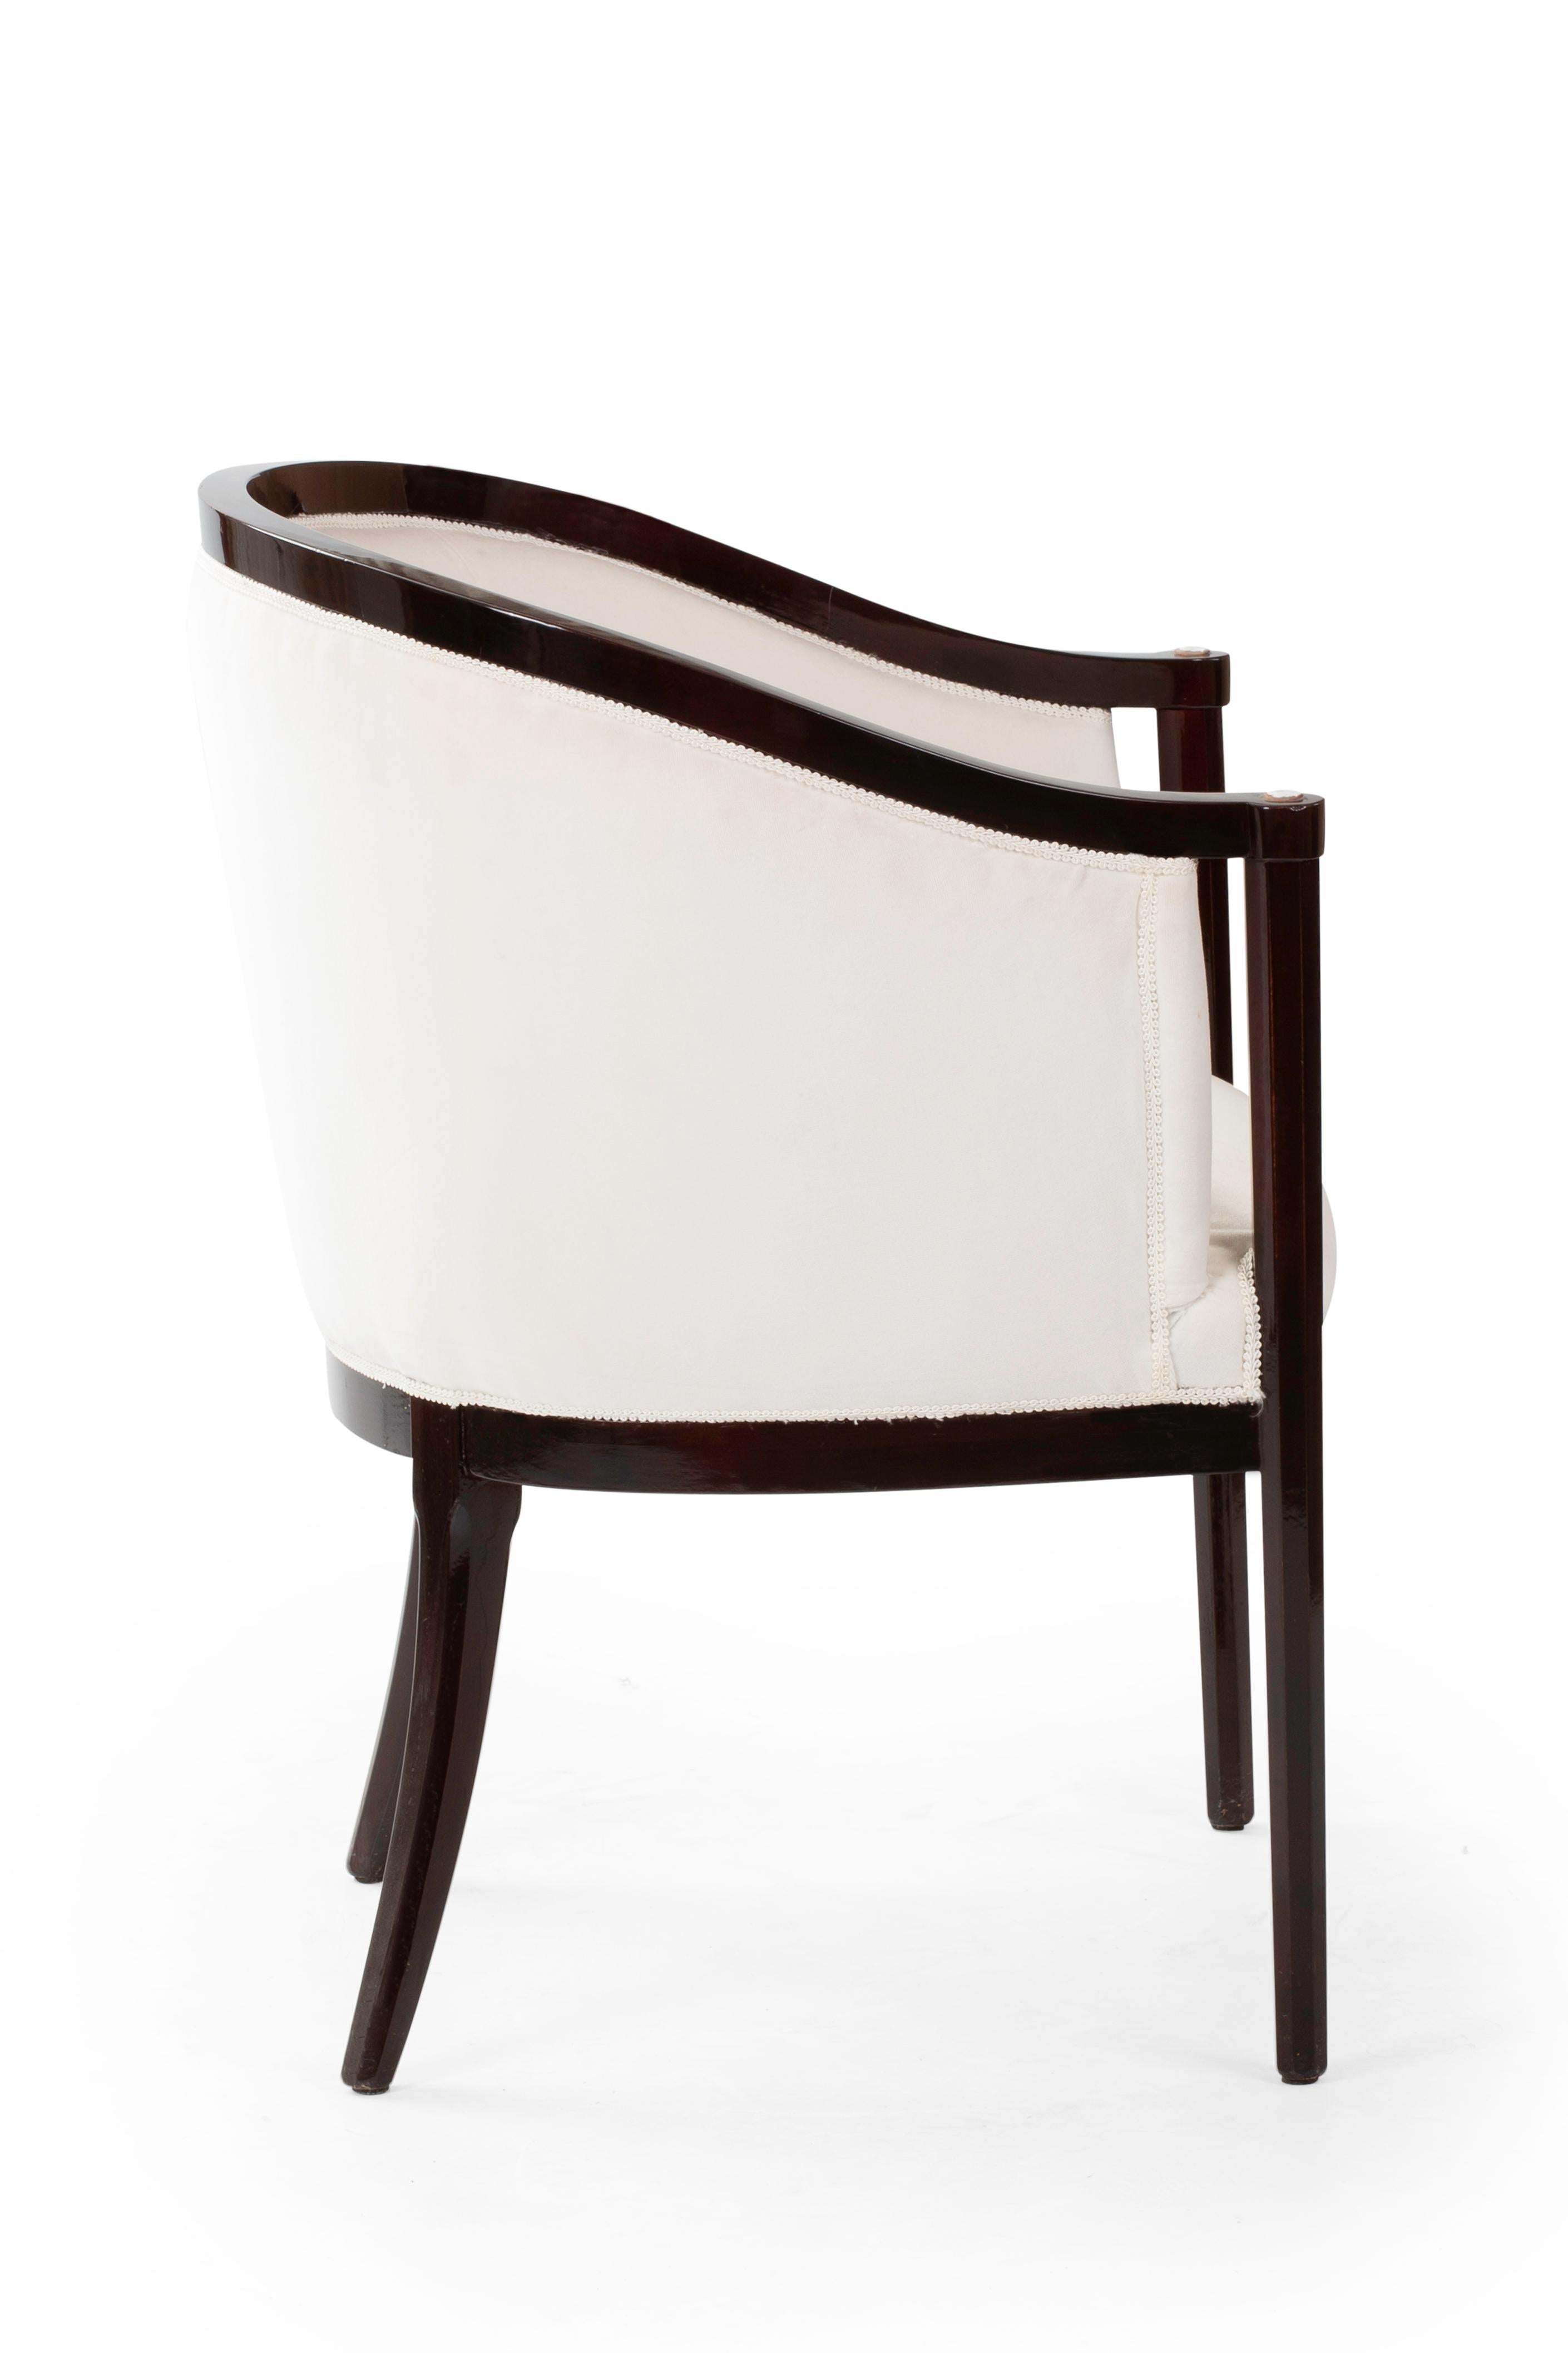 Italian 21st Century Lorsky Armchair, Velvet, Sardonic Shell, Solid Wood, Made in Italy For Sale